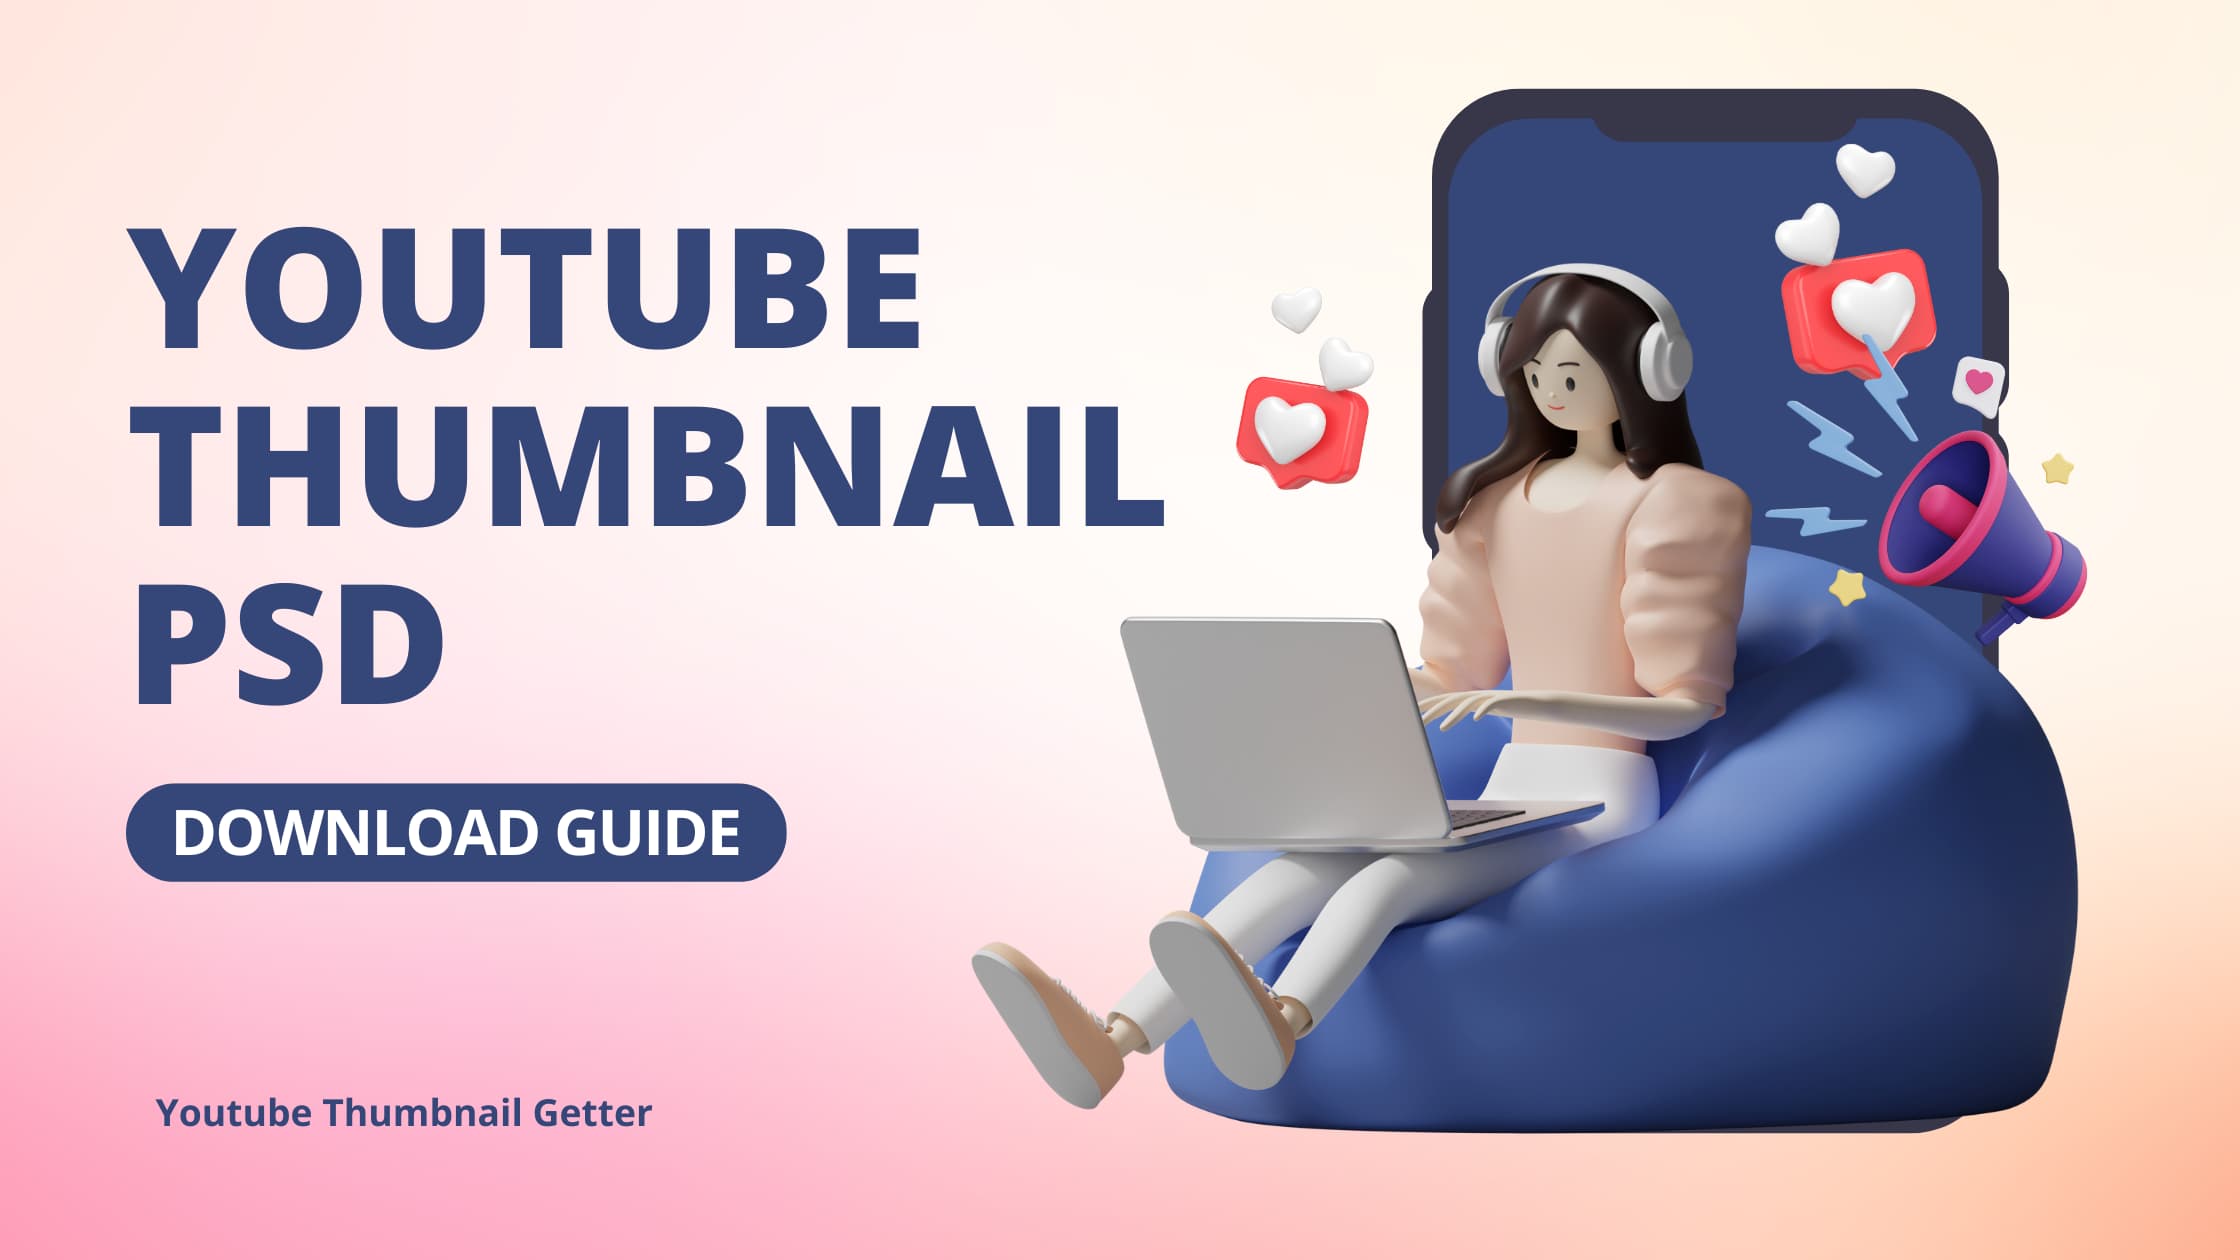 YouTube Thumbnail PSD Download Guide